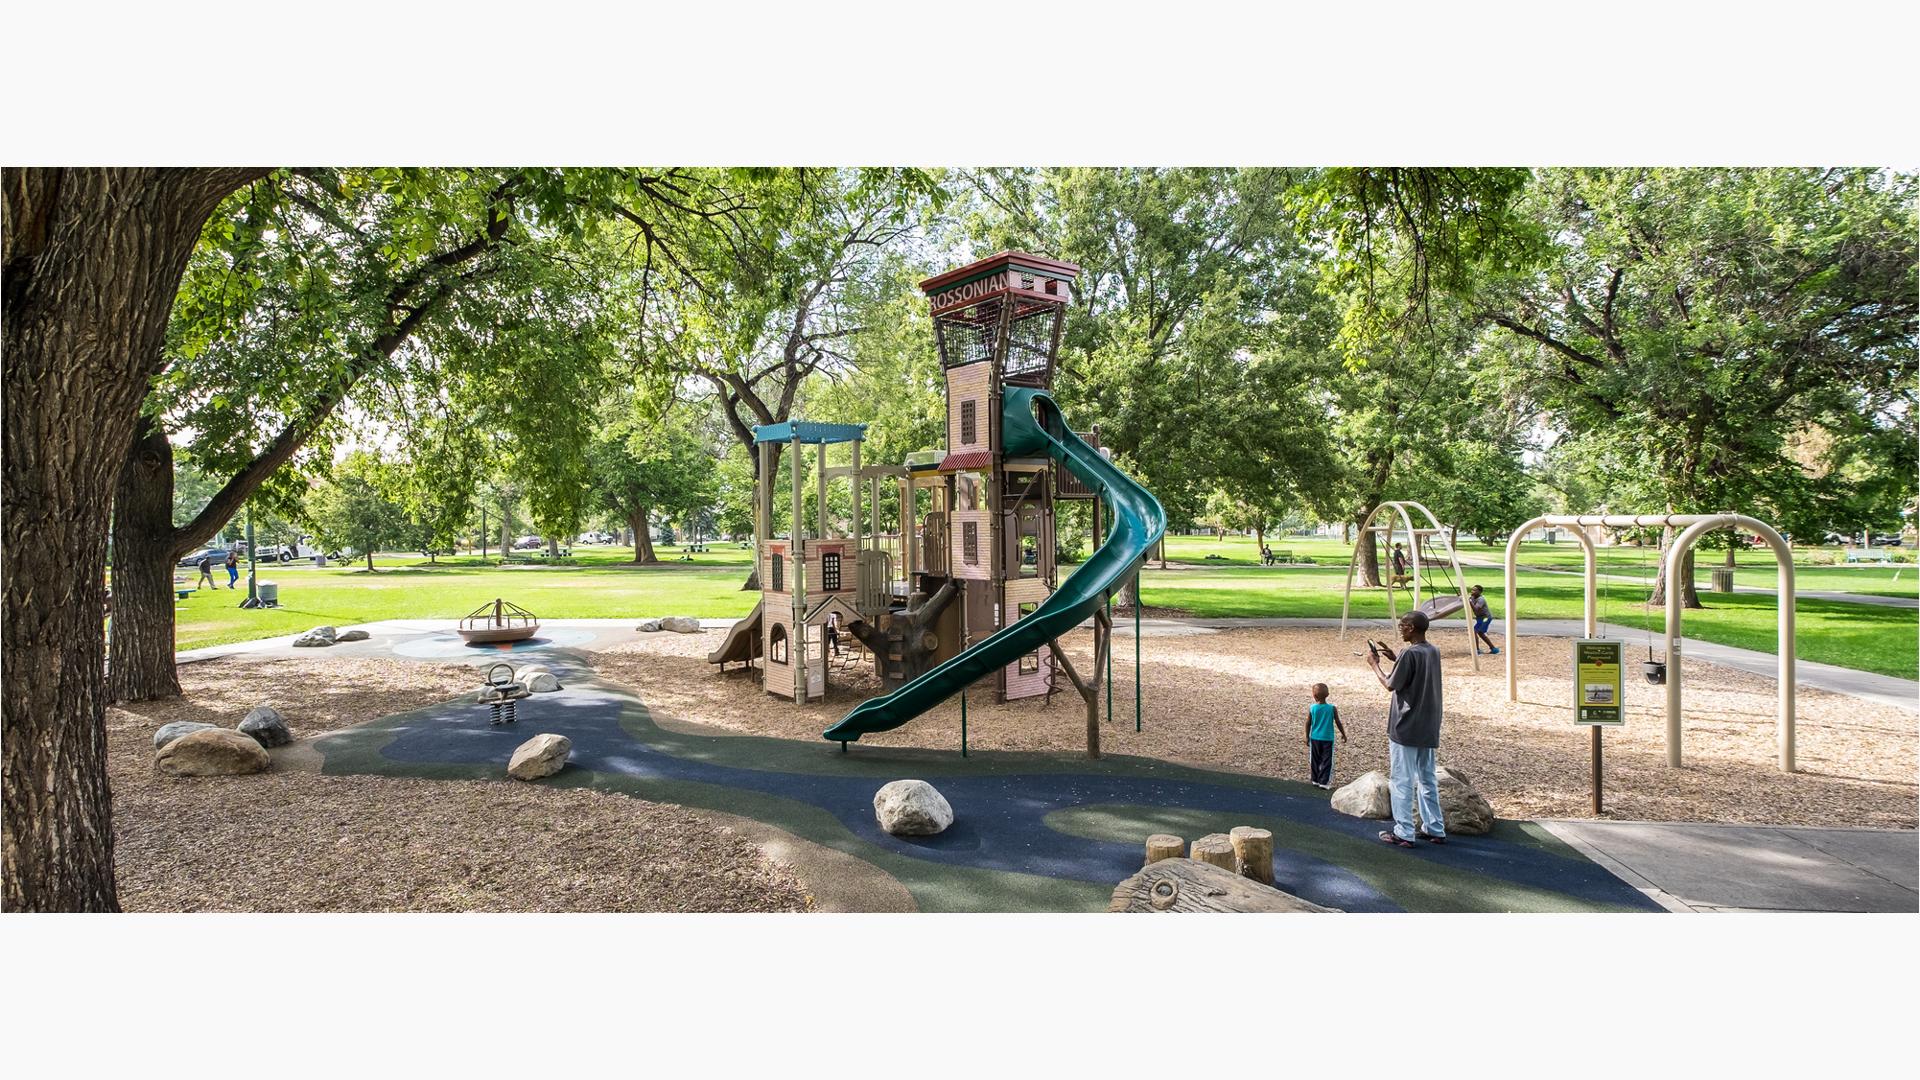 Mestizo-Curtis Park Denver, CO. This unique playground comes equipped with PlayBooster® play structure enclosed with DigiFuse® panels.